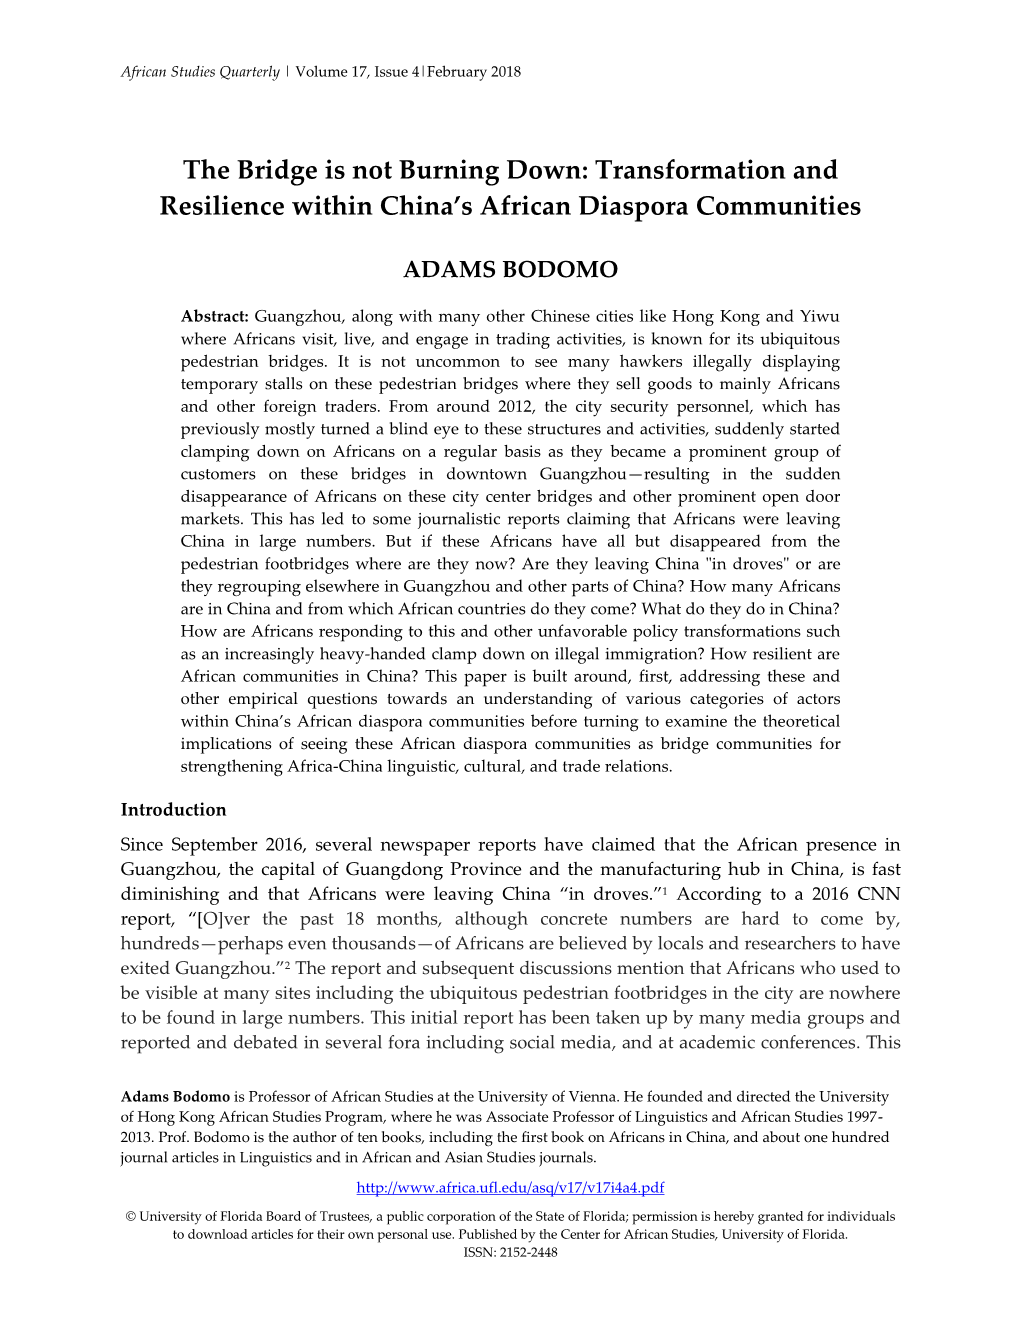 Transformation and Resilience Within China's African Diaspora